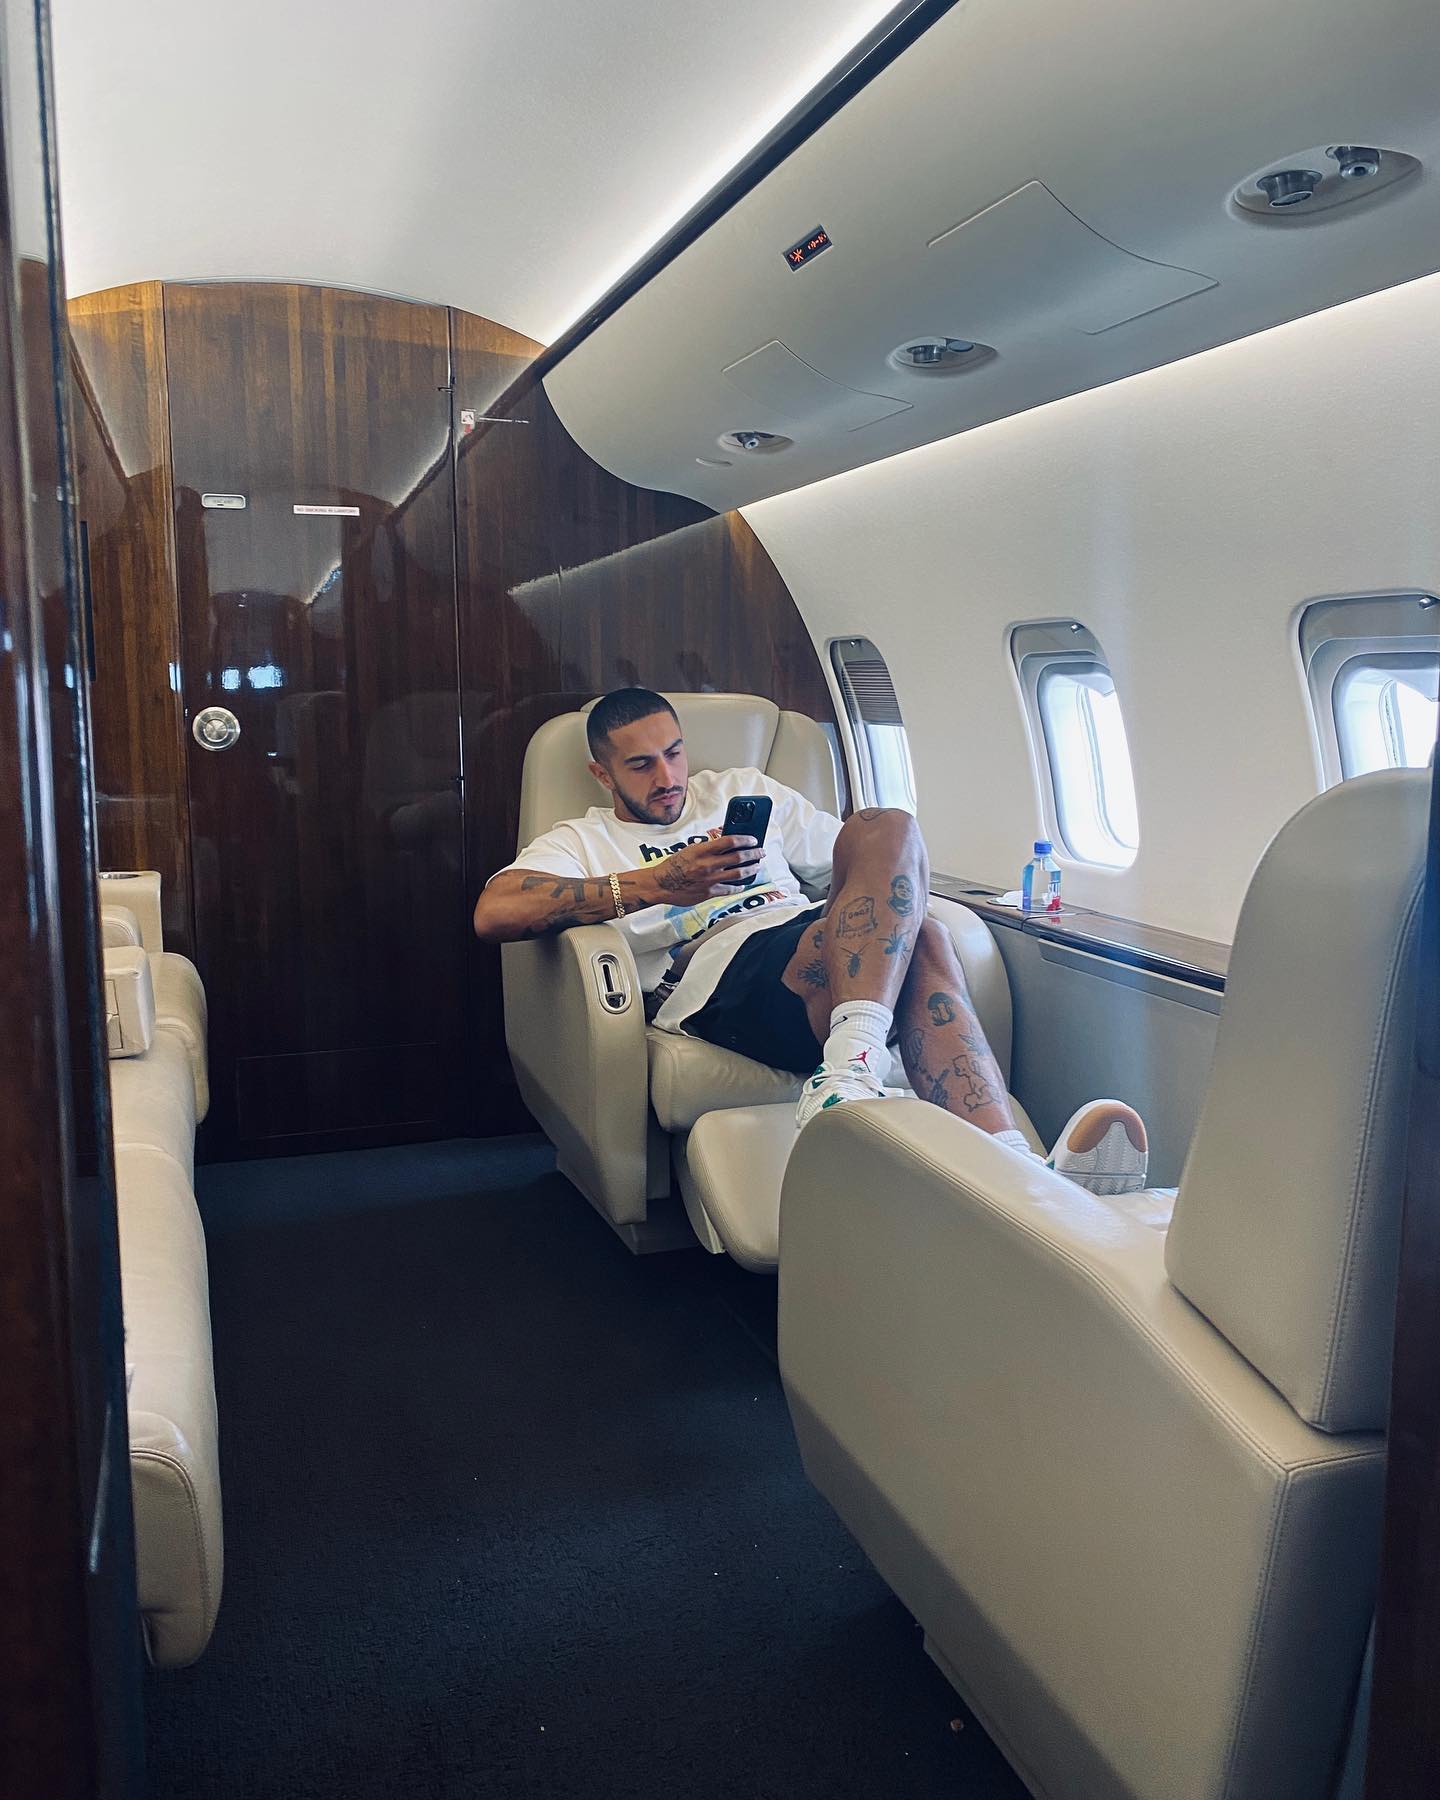 Aisan sitting in his private jet.